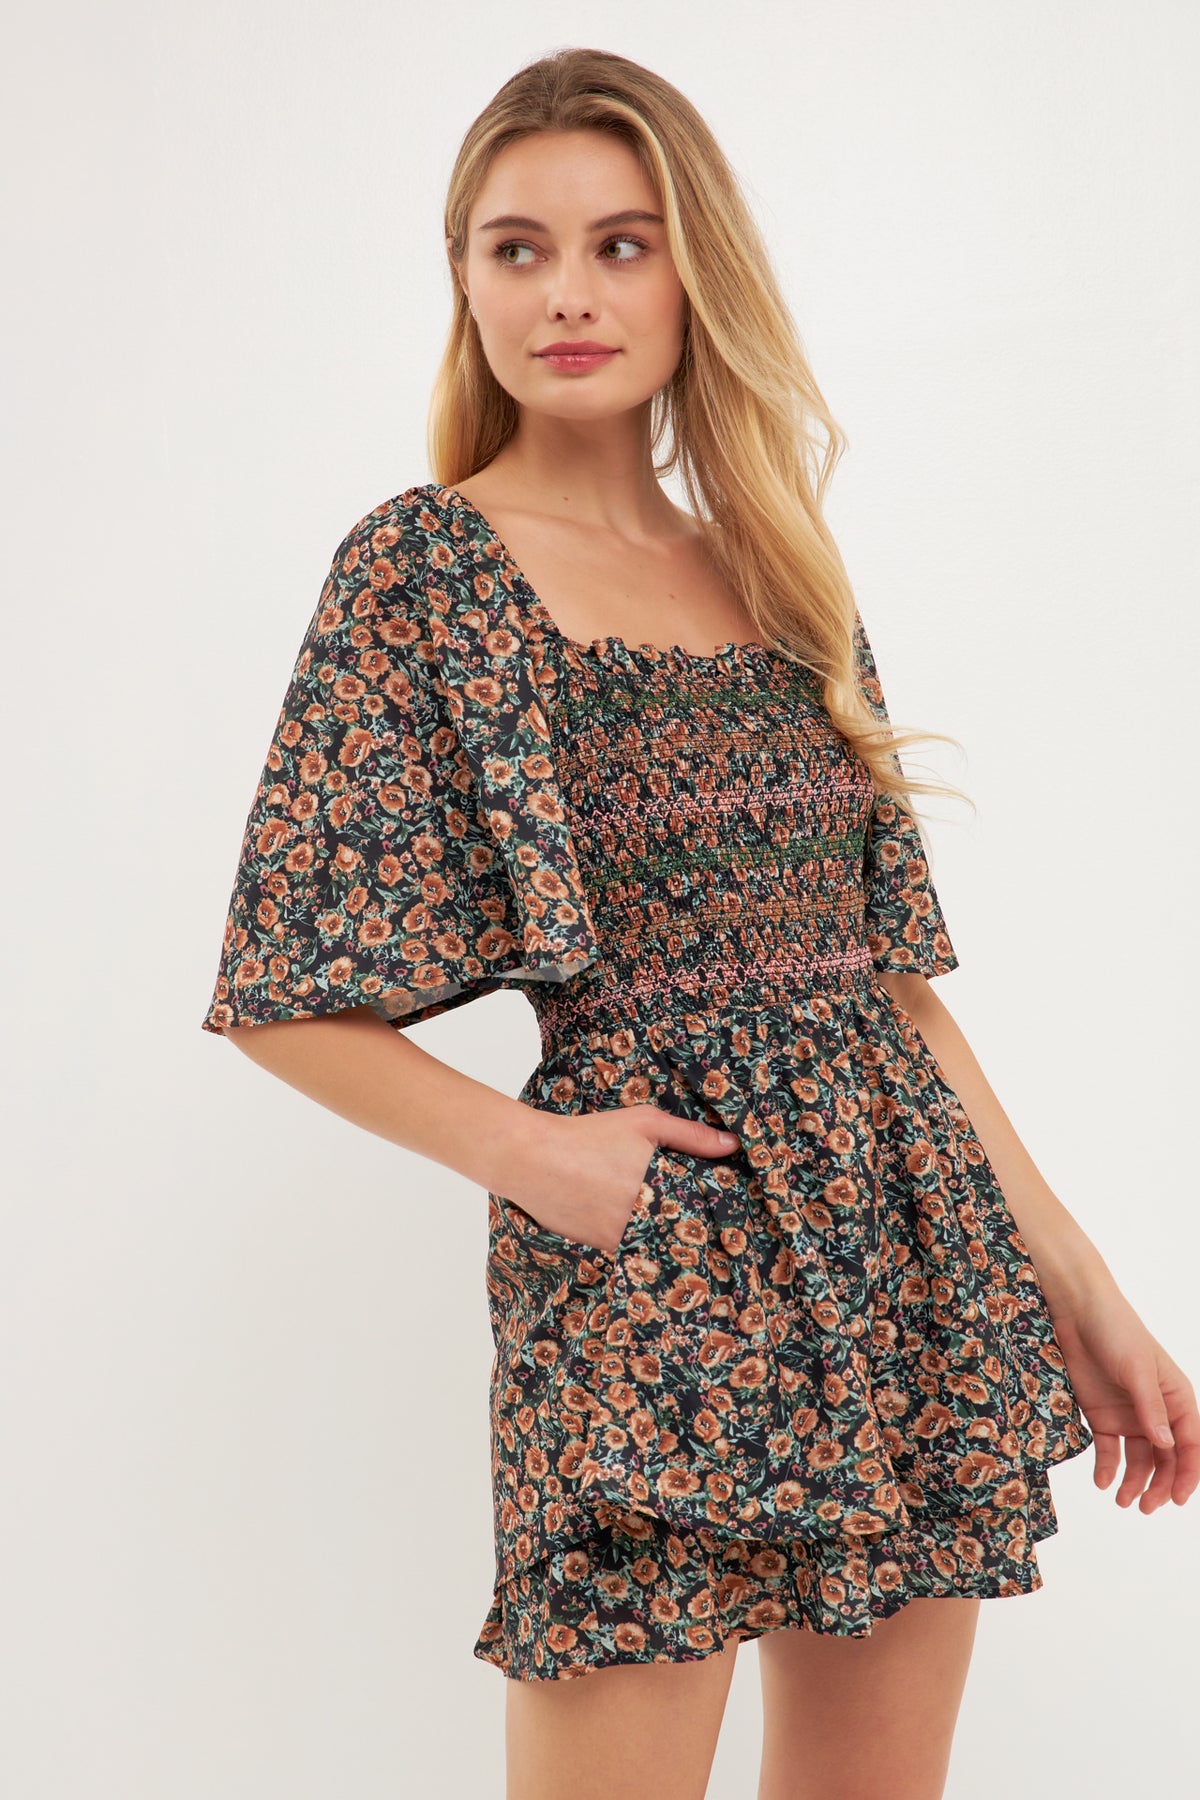 FREE THE ROSES - Smocked Detail Romper - ROMPERS available at Objectrare